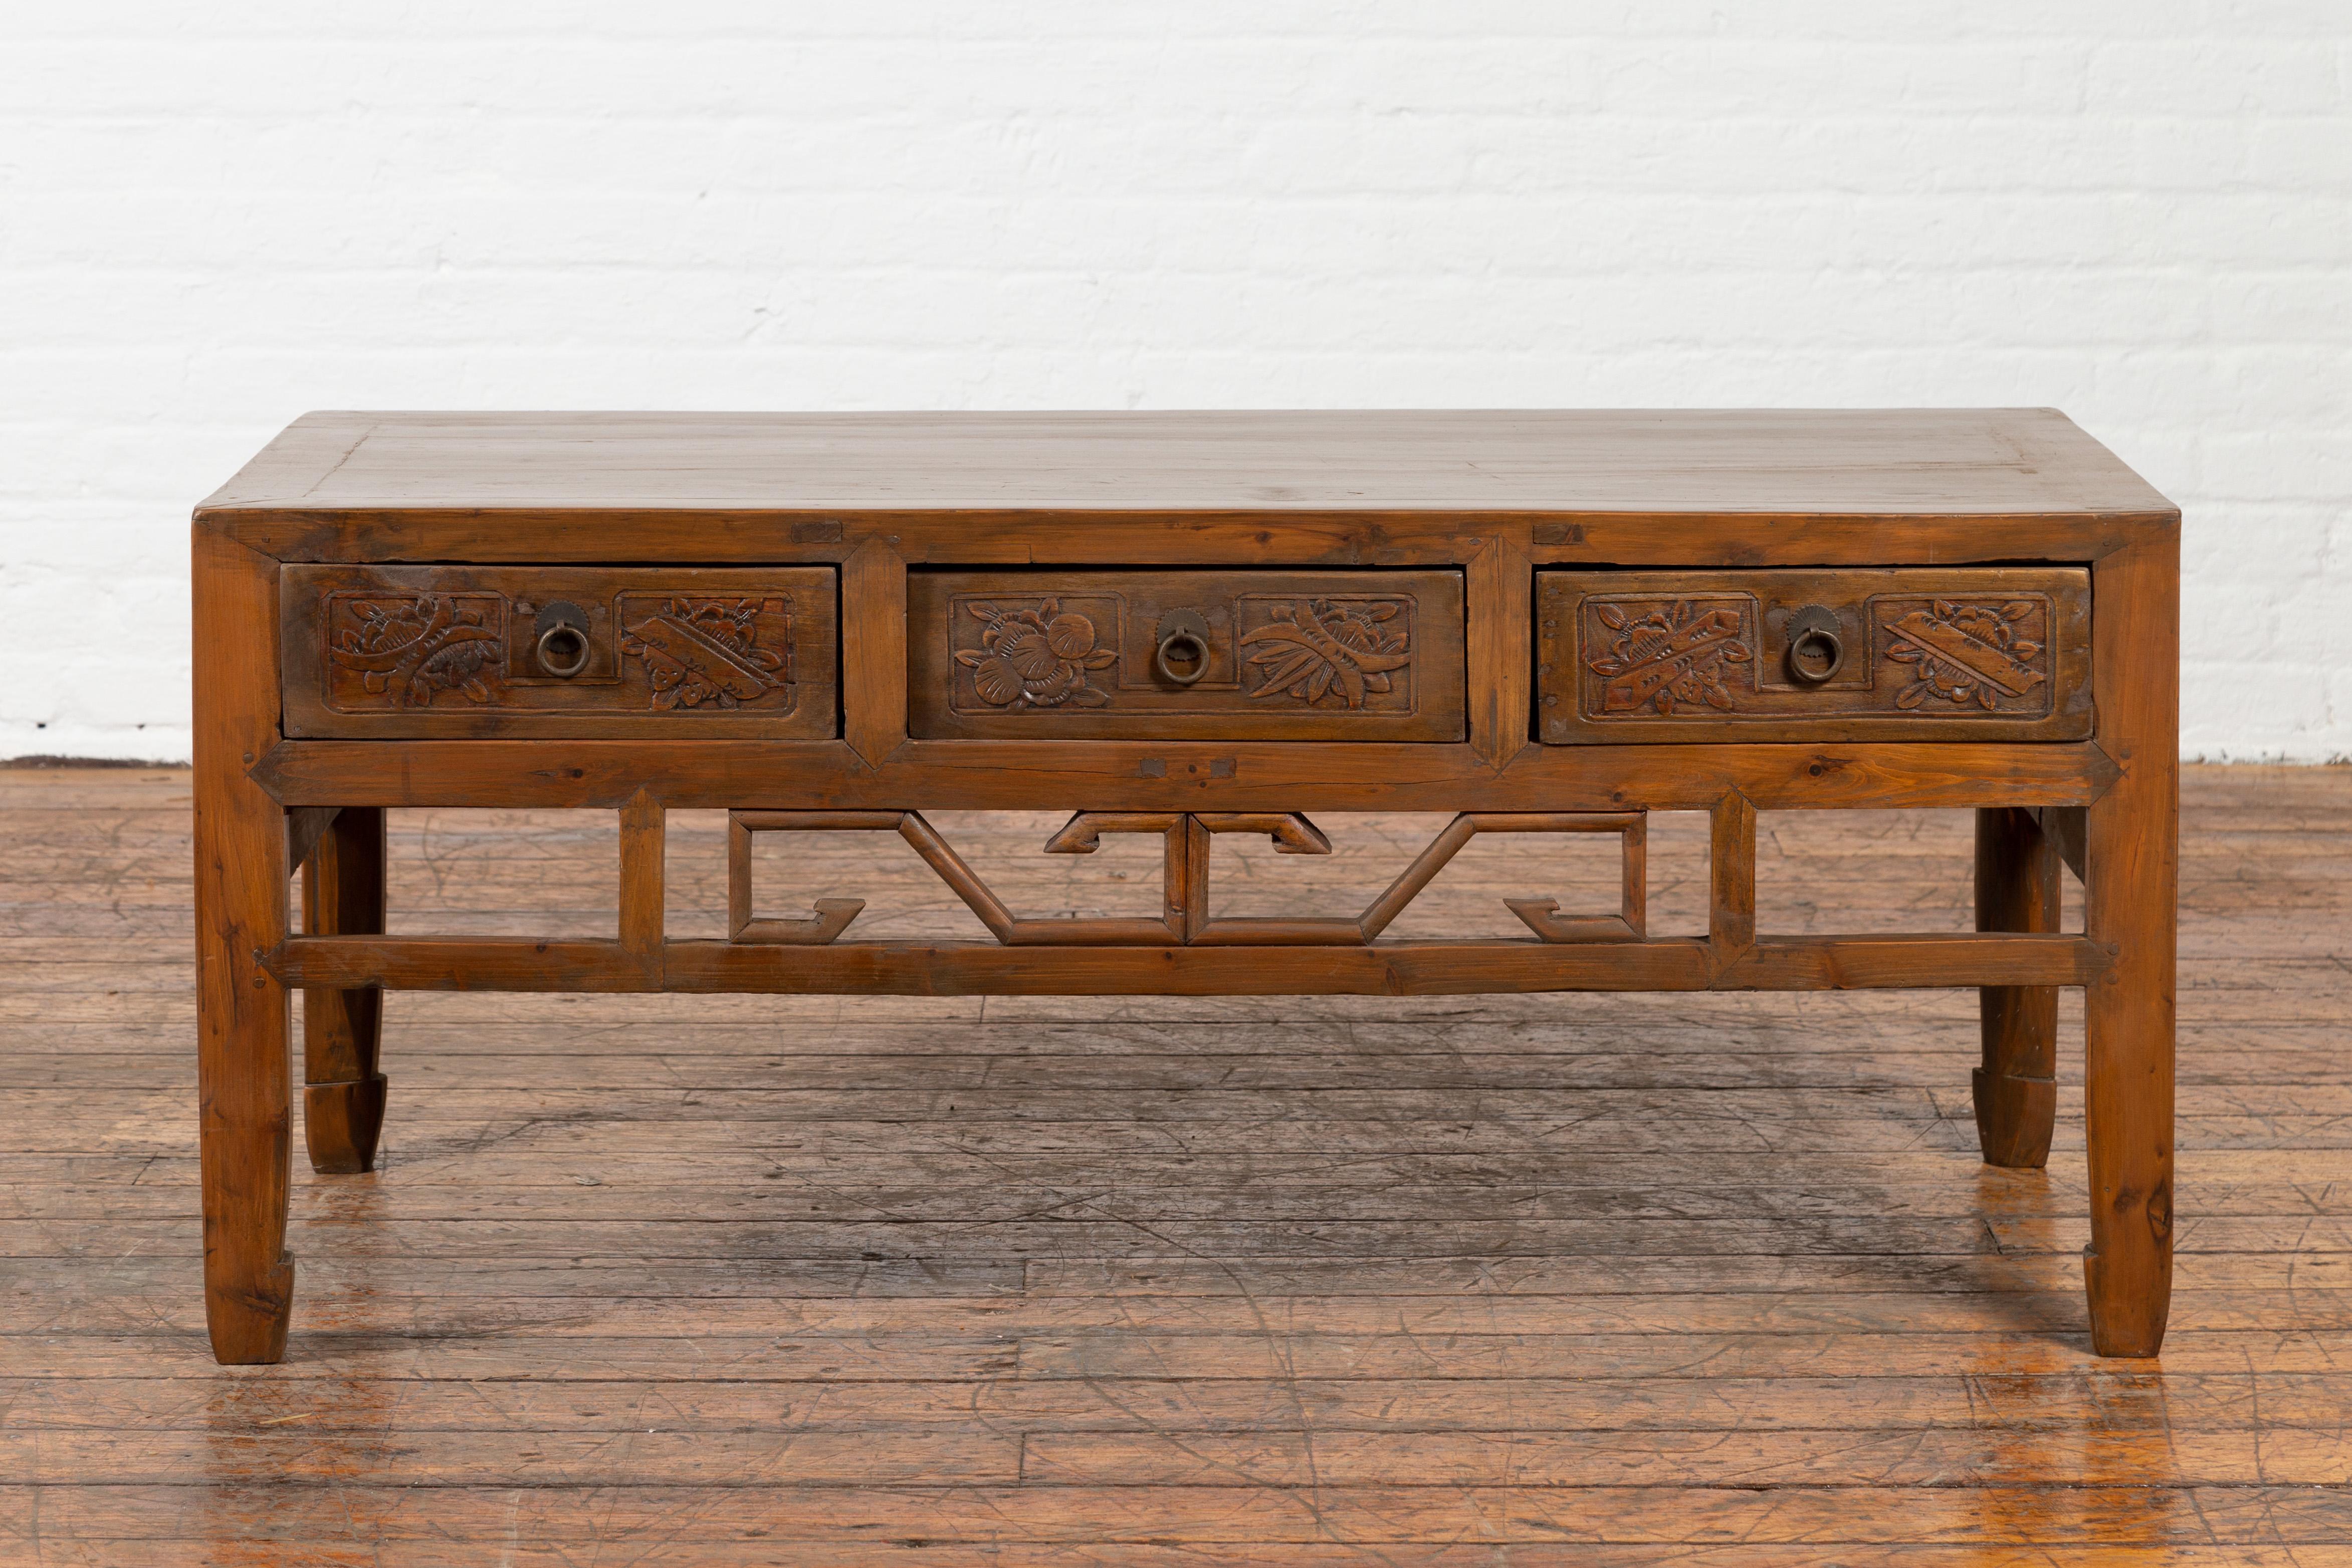 A Chinese vintage coffee table from the mid 20th century, with three carved drawers, pierced apron and horse hoof feet. Created in China during the midcentury period, this vintage coffee table features a rectangular planked top sitting above three